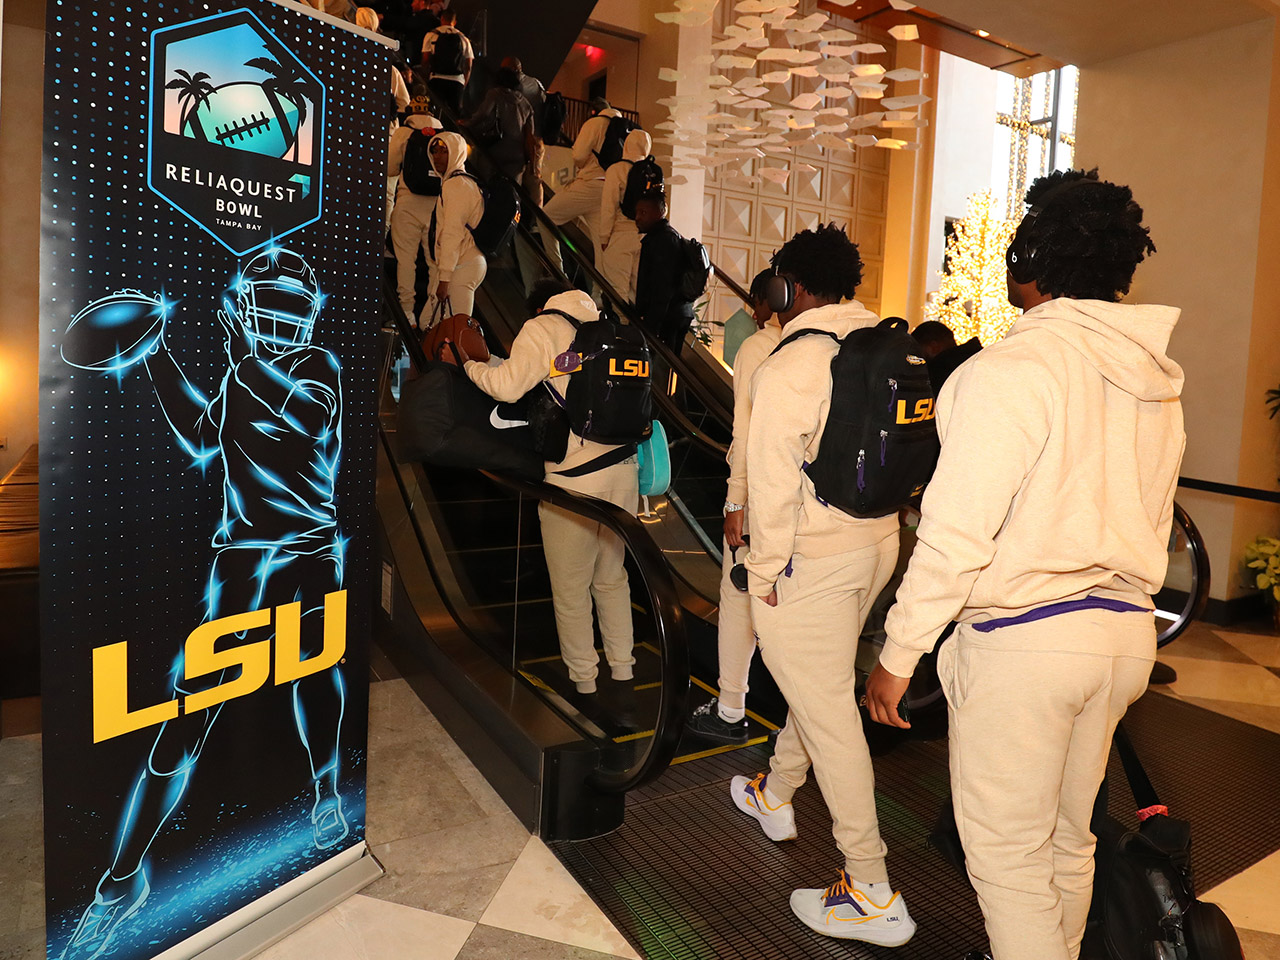 Players arrive at the JW Marriott Tampa Water Street to prepare for the ReliaQuest Bowl